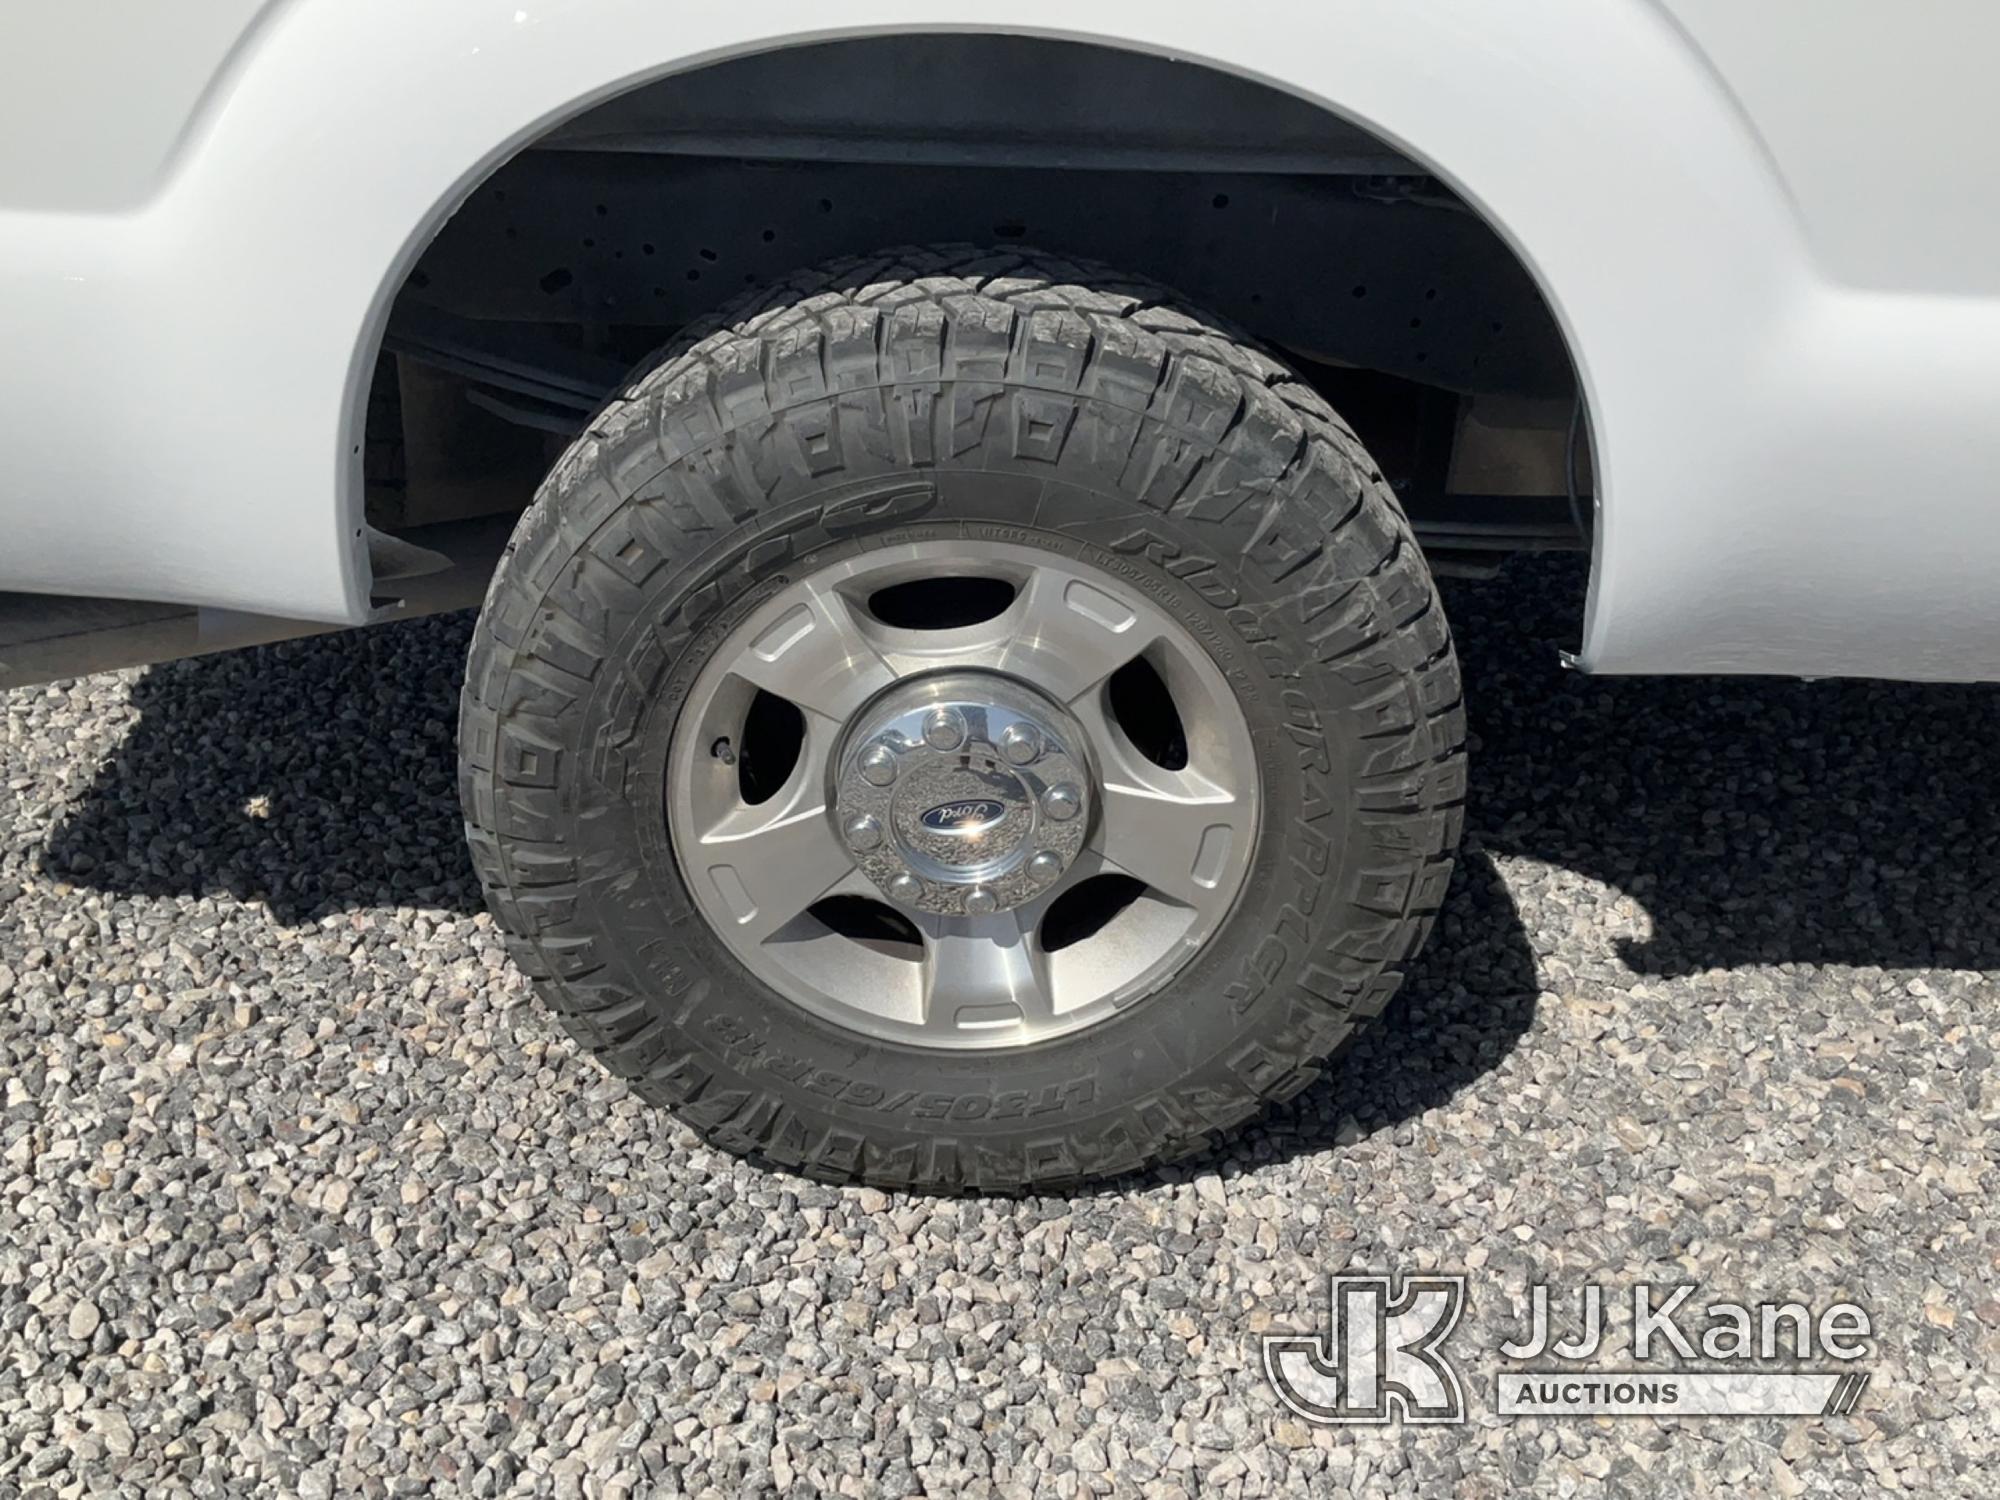 (Las Vegas, NV) 2016 Ford F250 4x4 Towed In, No Console Check Engine Light On, Engine Noise, Runs &